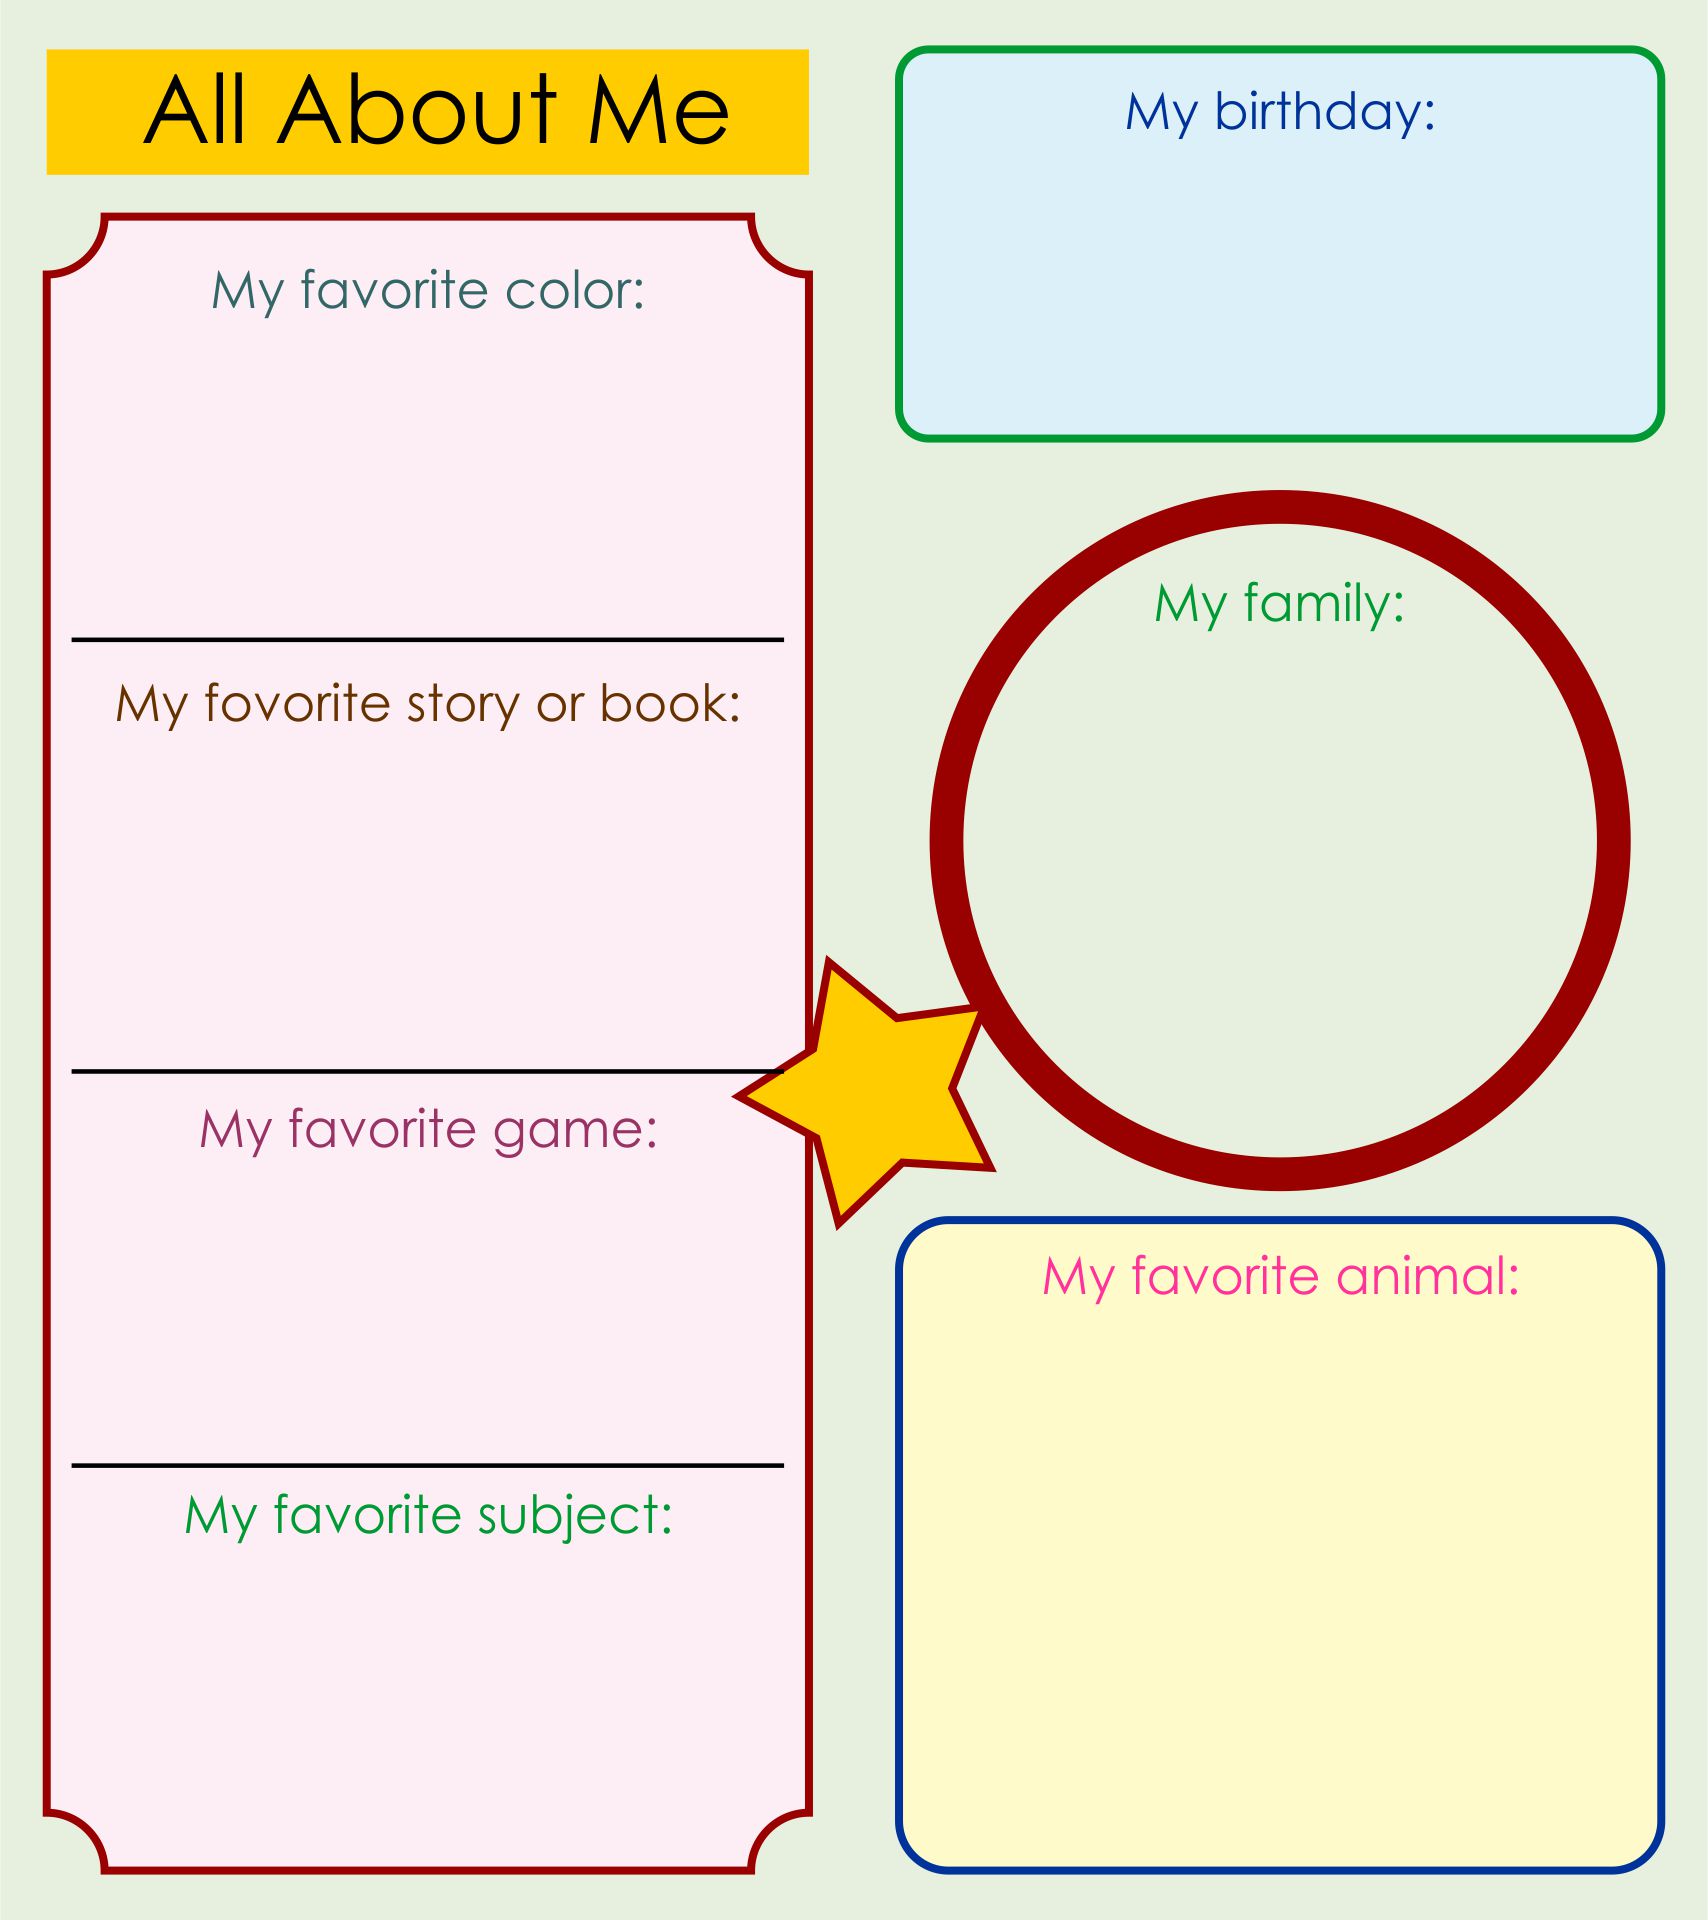 10 Best All About Me Printable Template